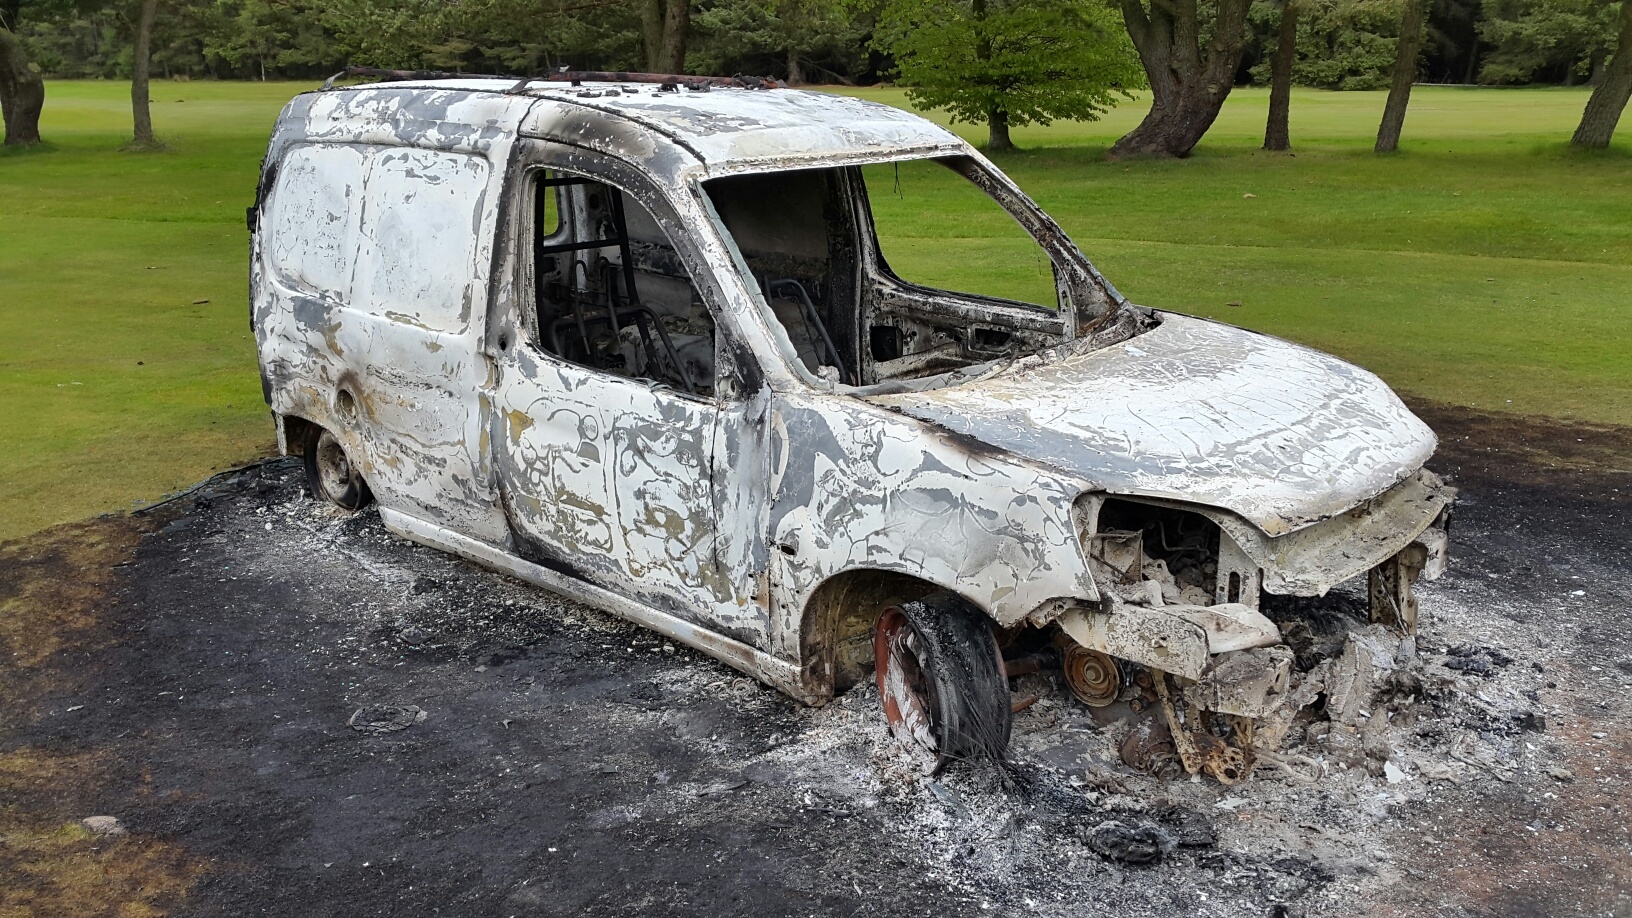 The car was at Hazlehead Golf Club at the time of the fire